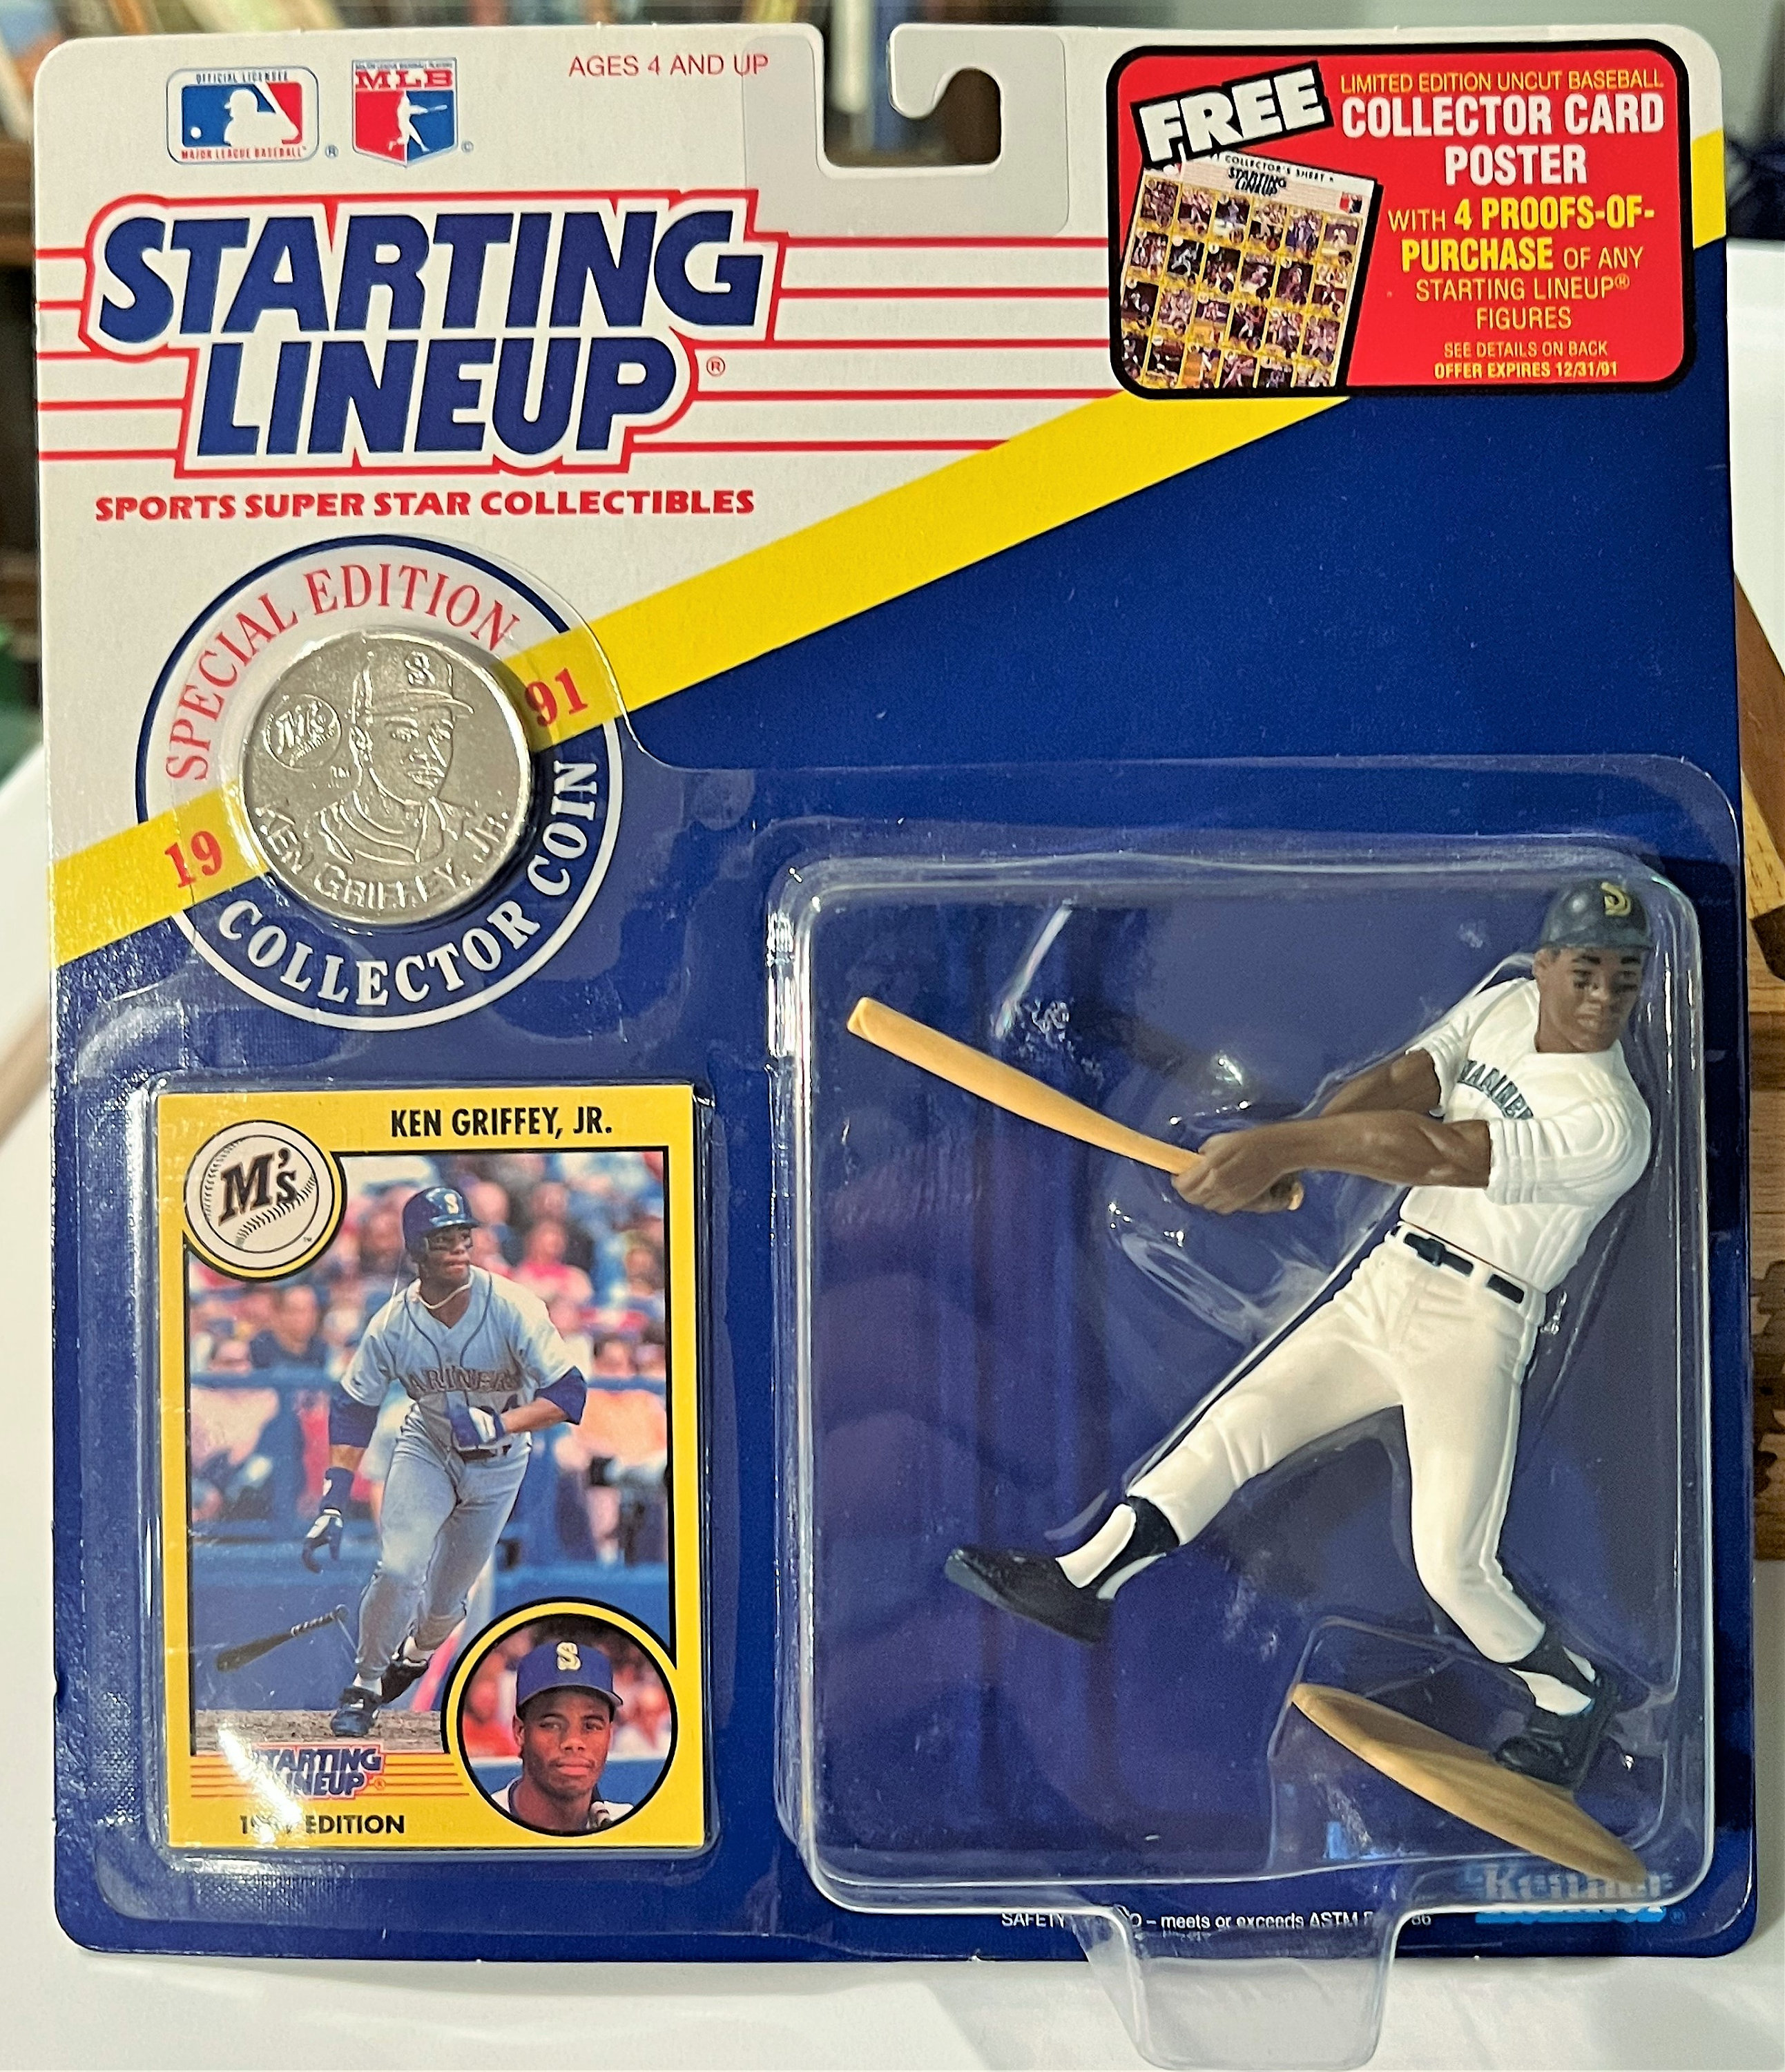 Seattle Mariners for sale online 1993 Ken Griffey Jr Starting Lineup Action Figure by Kenner